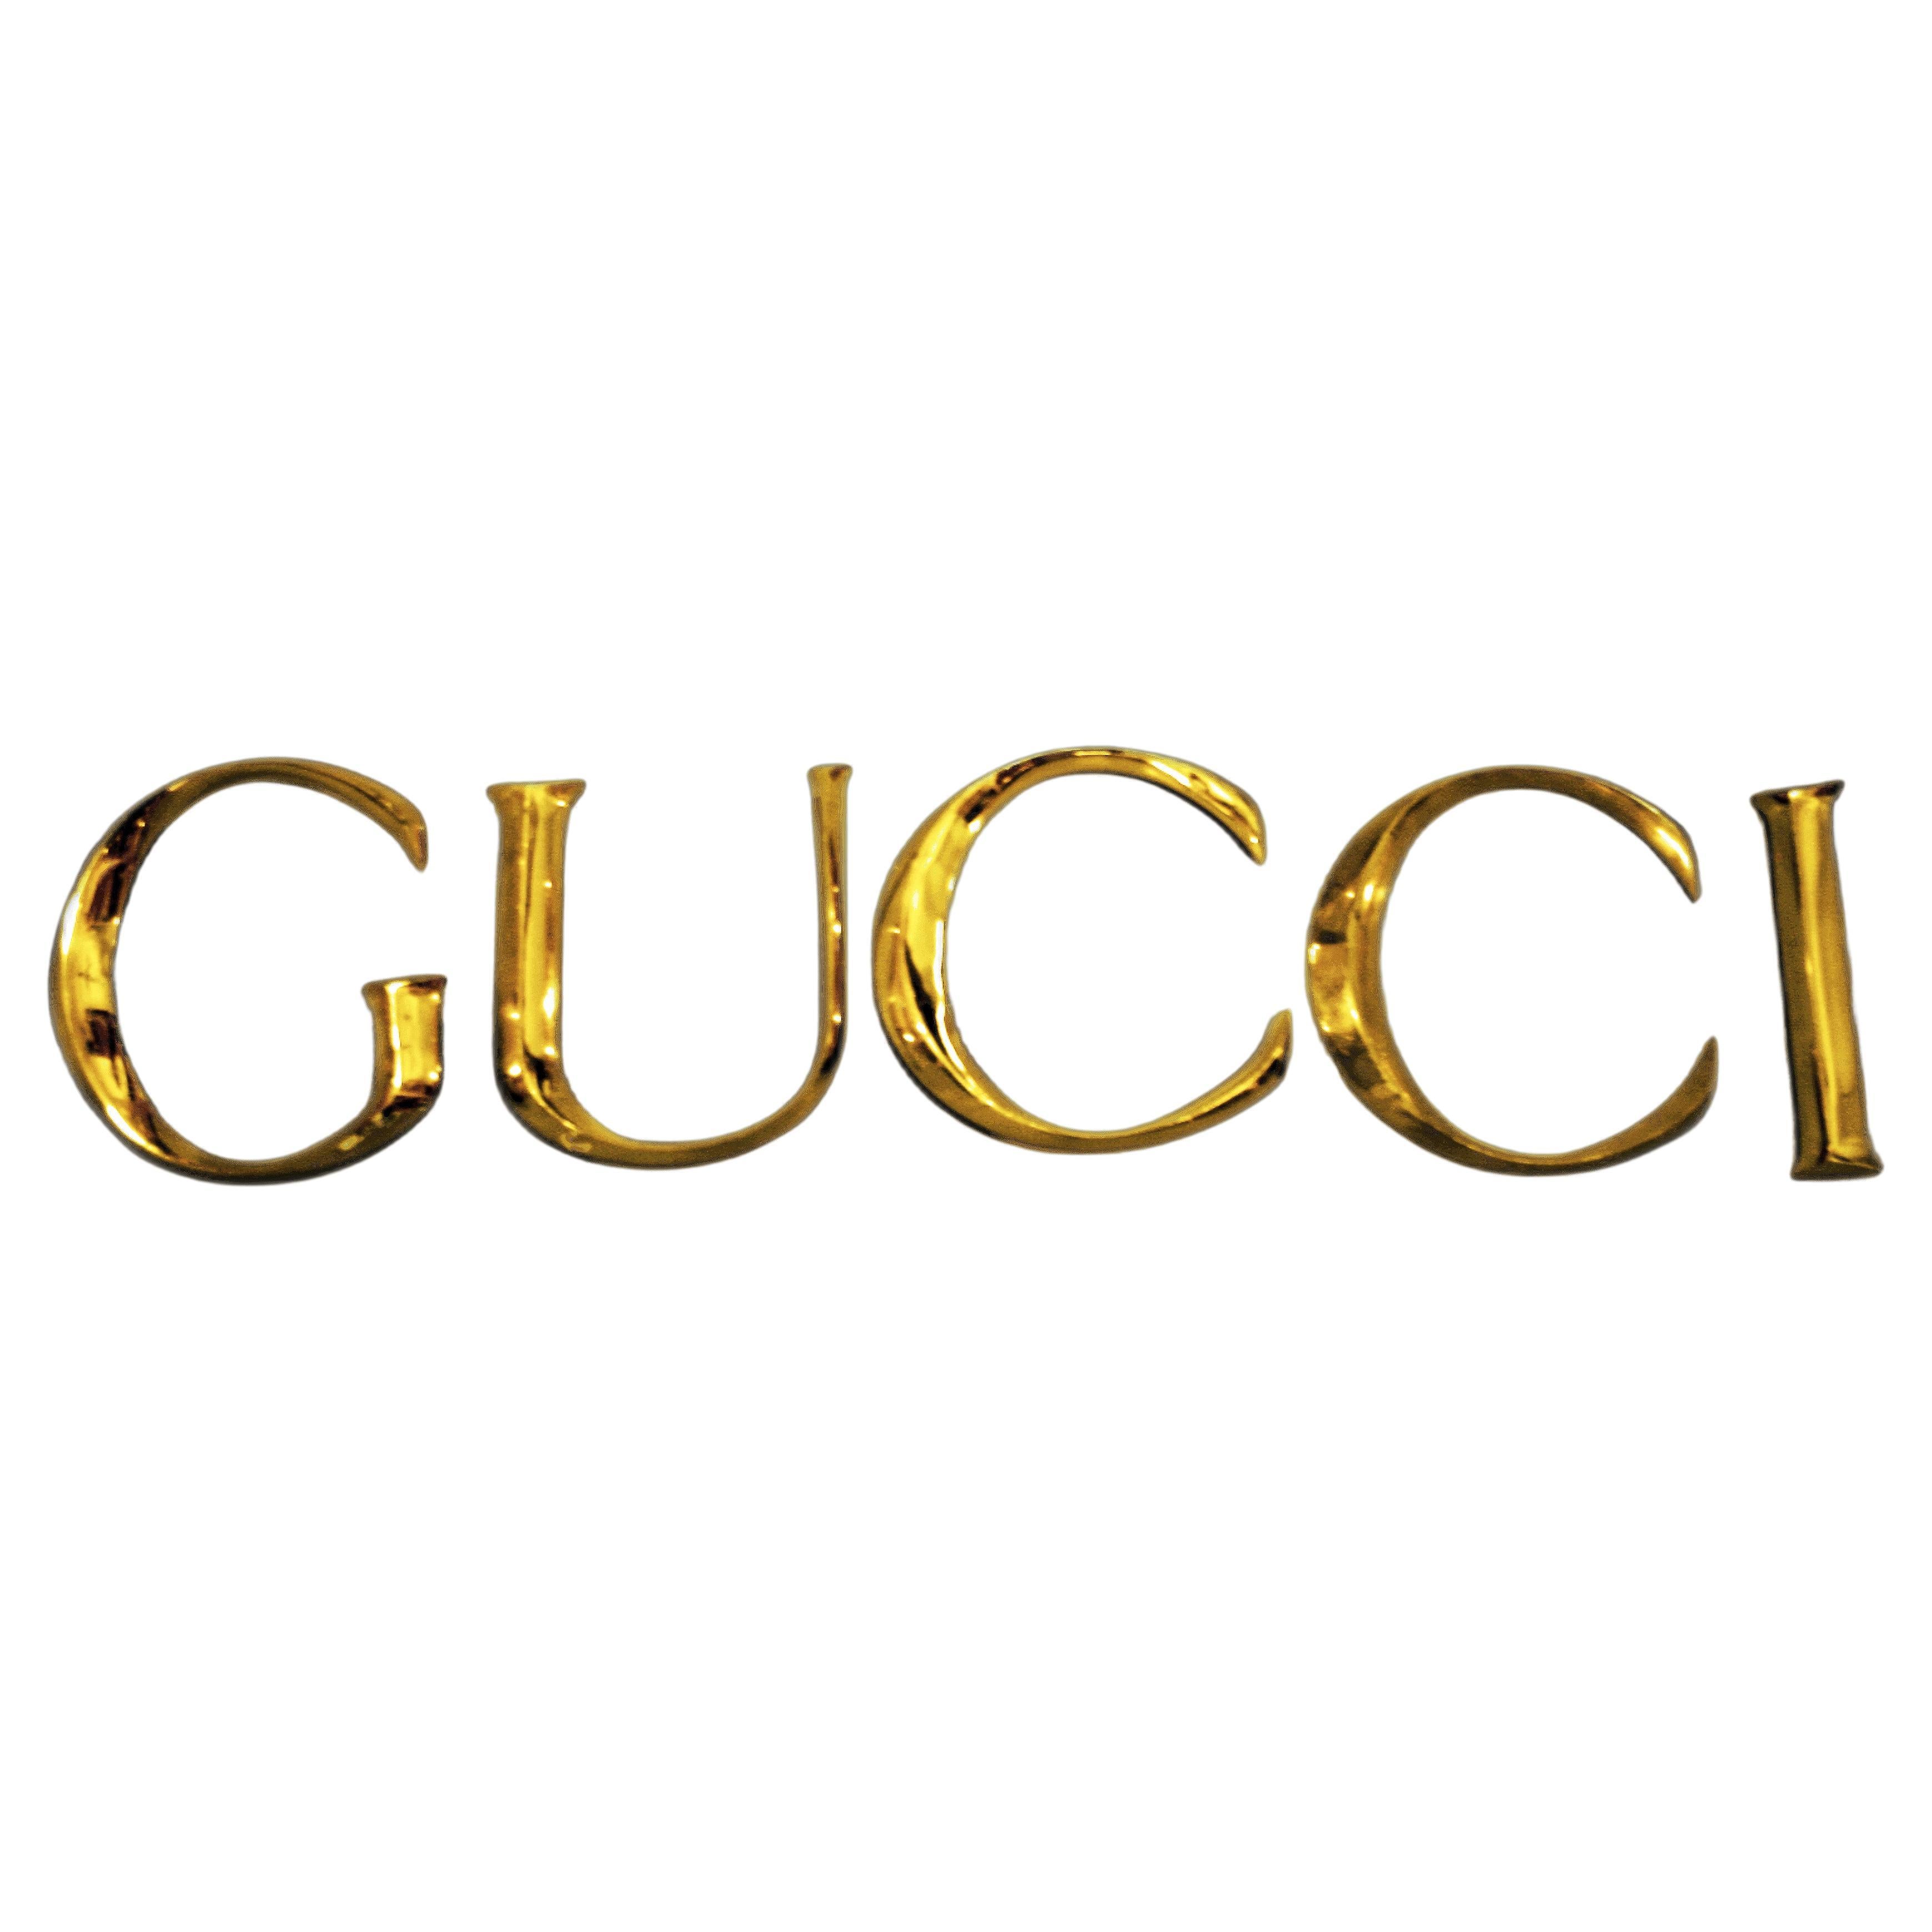 Late 20th Century Decorative Wall Ornament Gucci Letters Made in Golden Brass For Sale